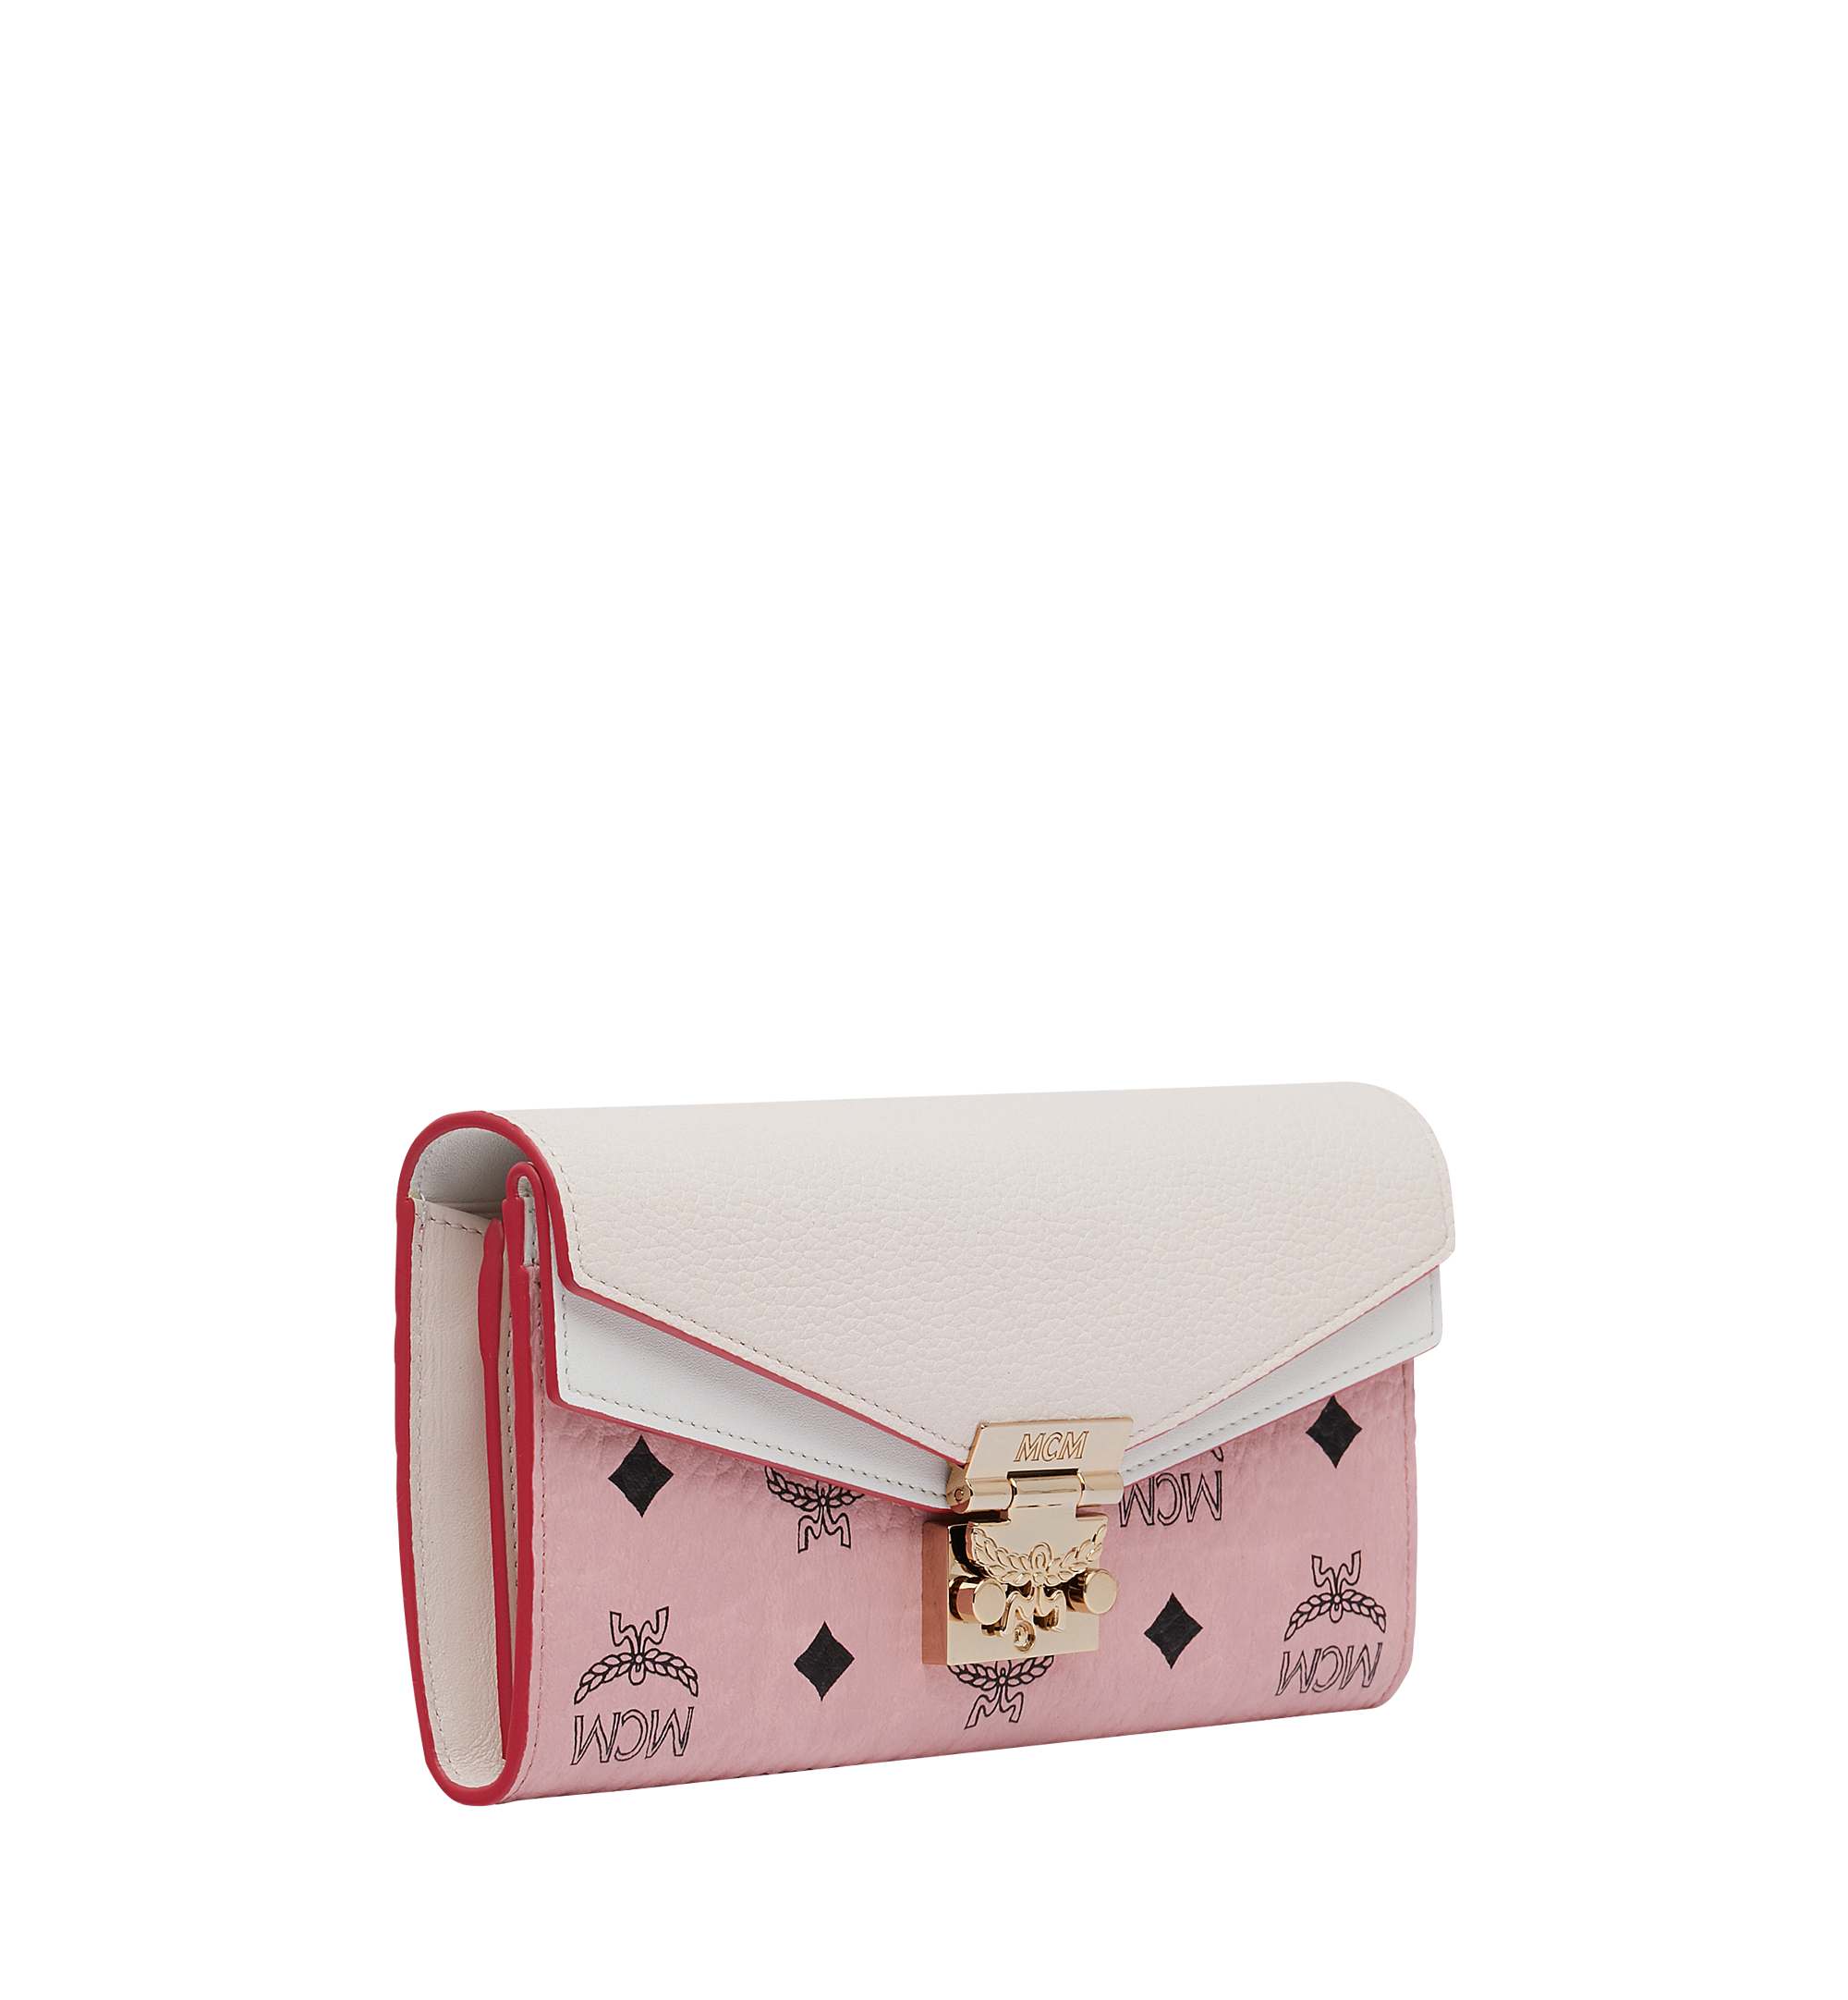 MCM Pink Visetos Patricia Crossbody Wallet - A World Of Goods For